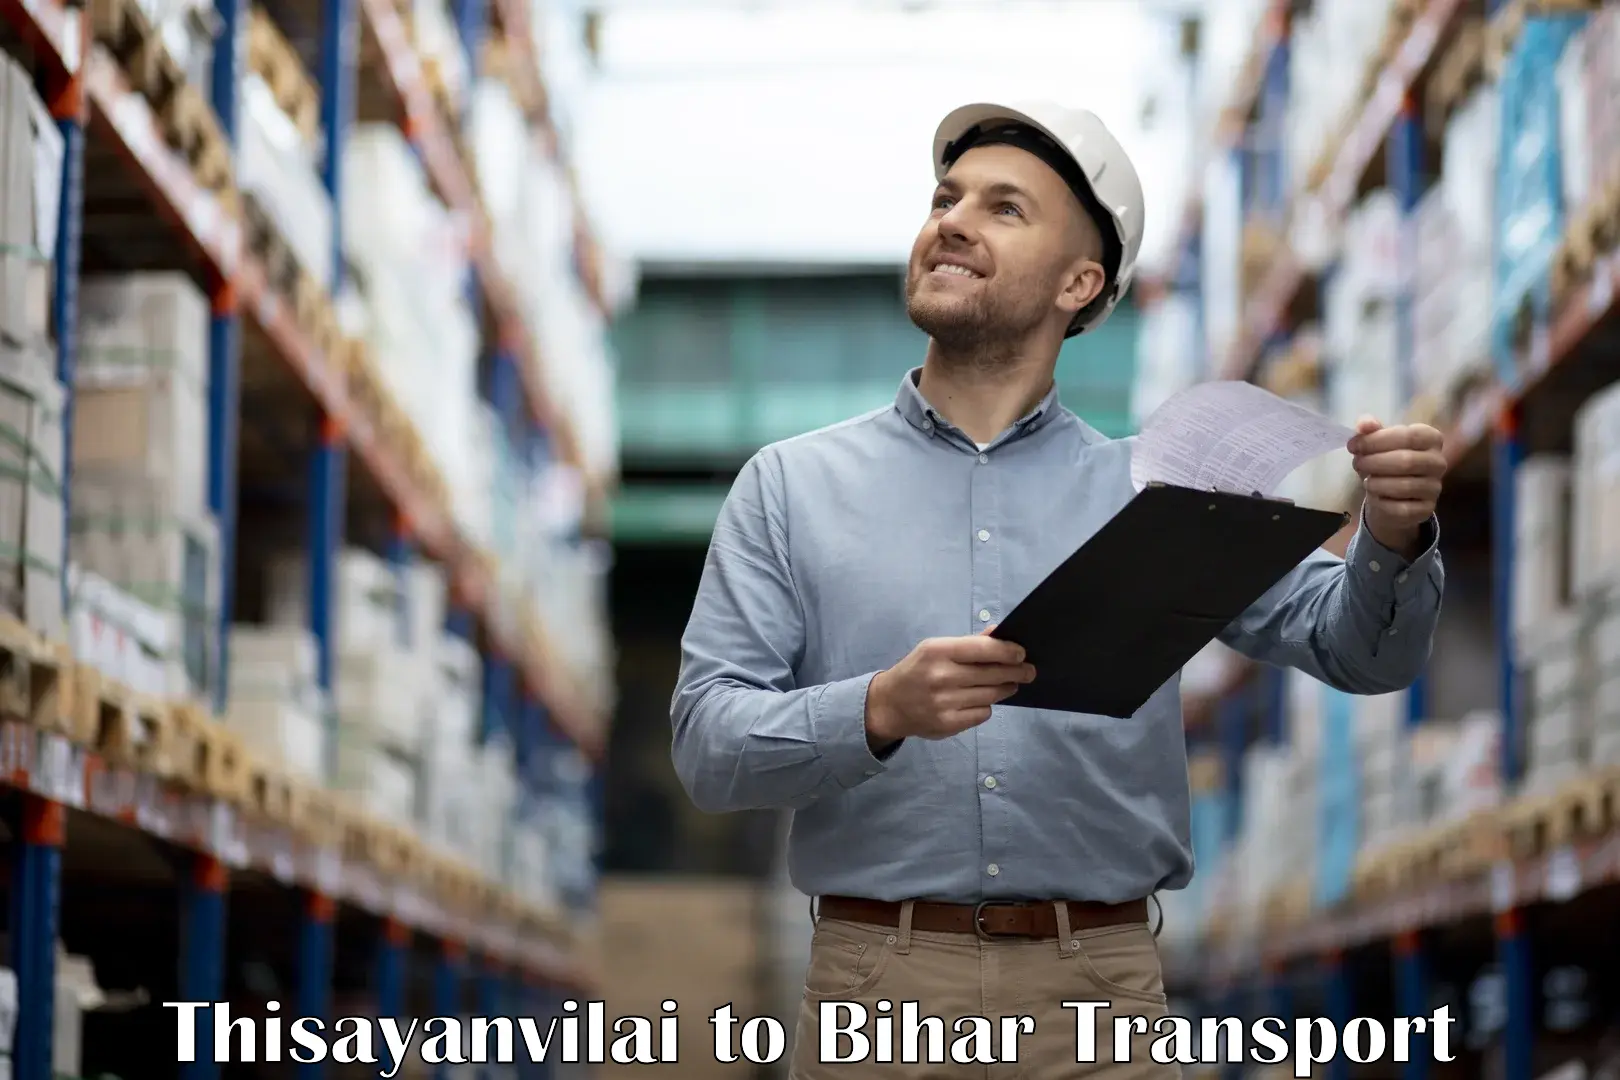 Vehicle parcel service Thisayanvilai to Biraul